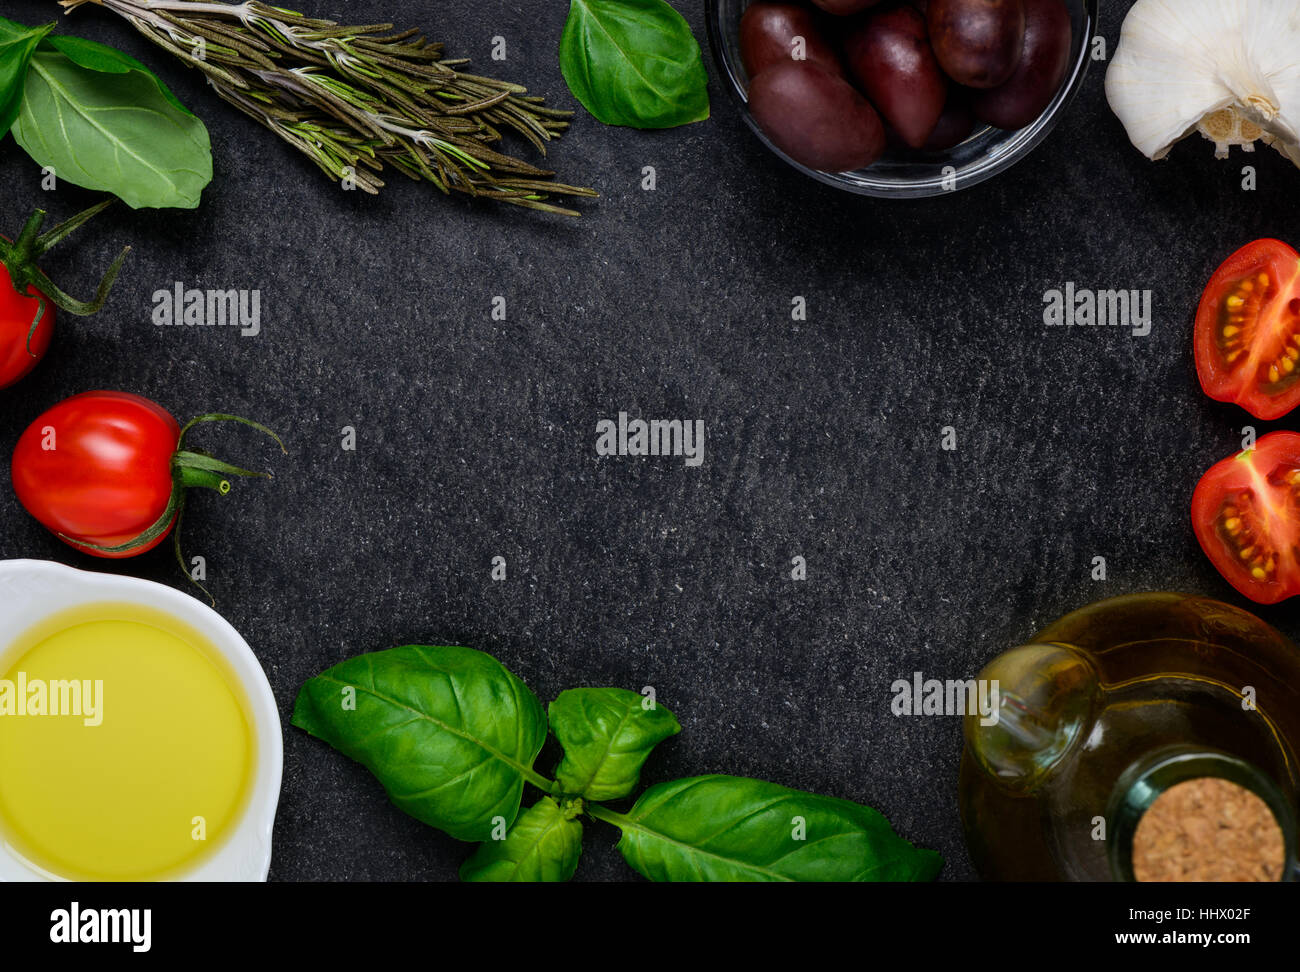 Copy Space Frame made out of cooking ingredients, cheese, olive oil, olives, basil. Stock Photo